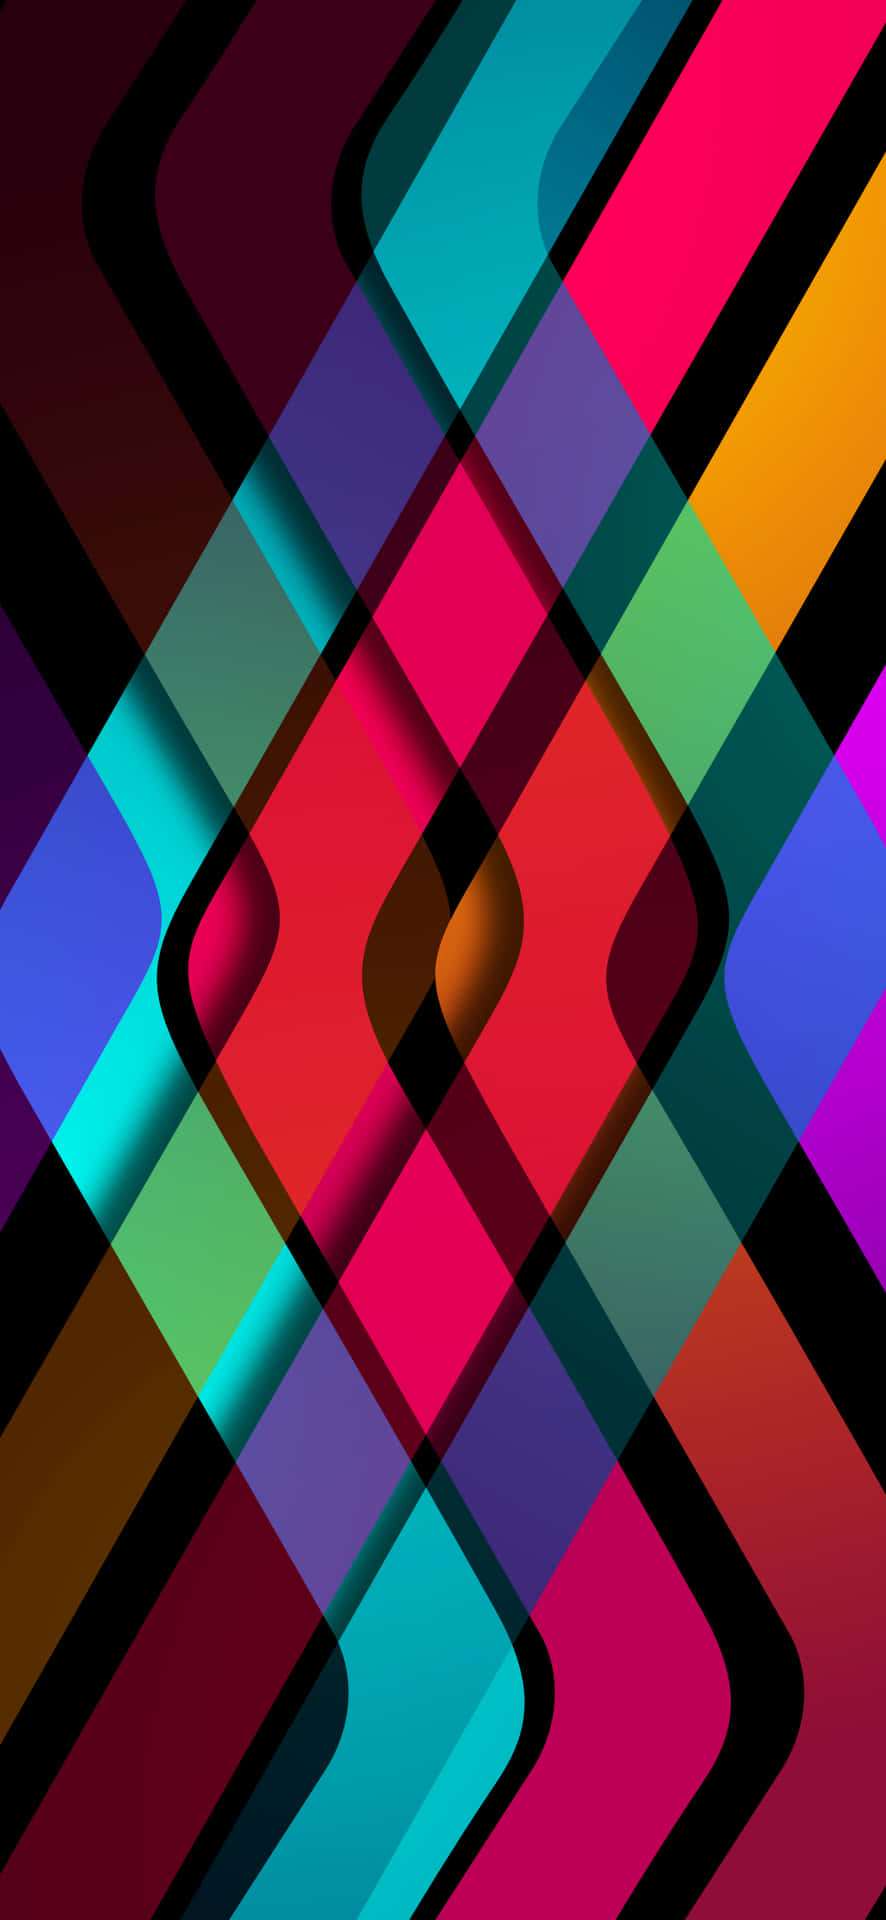 Abstract Colorful Geometric Pattern Wallpaper